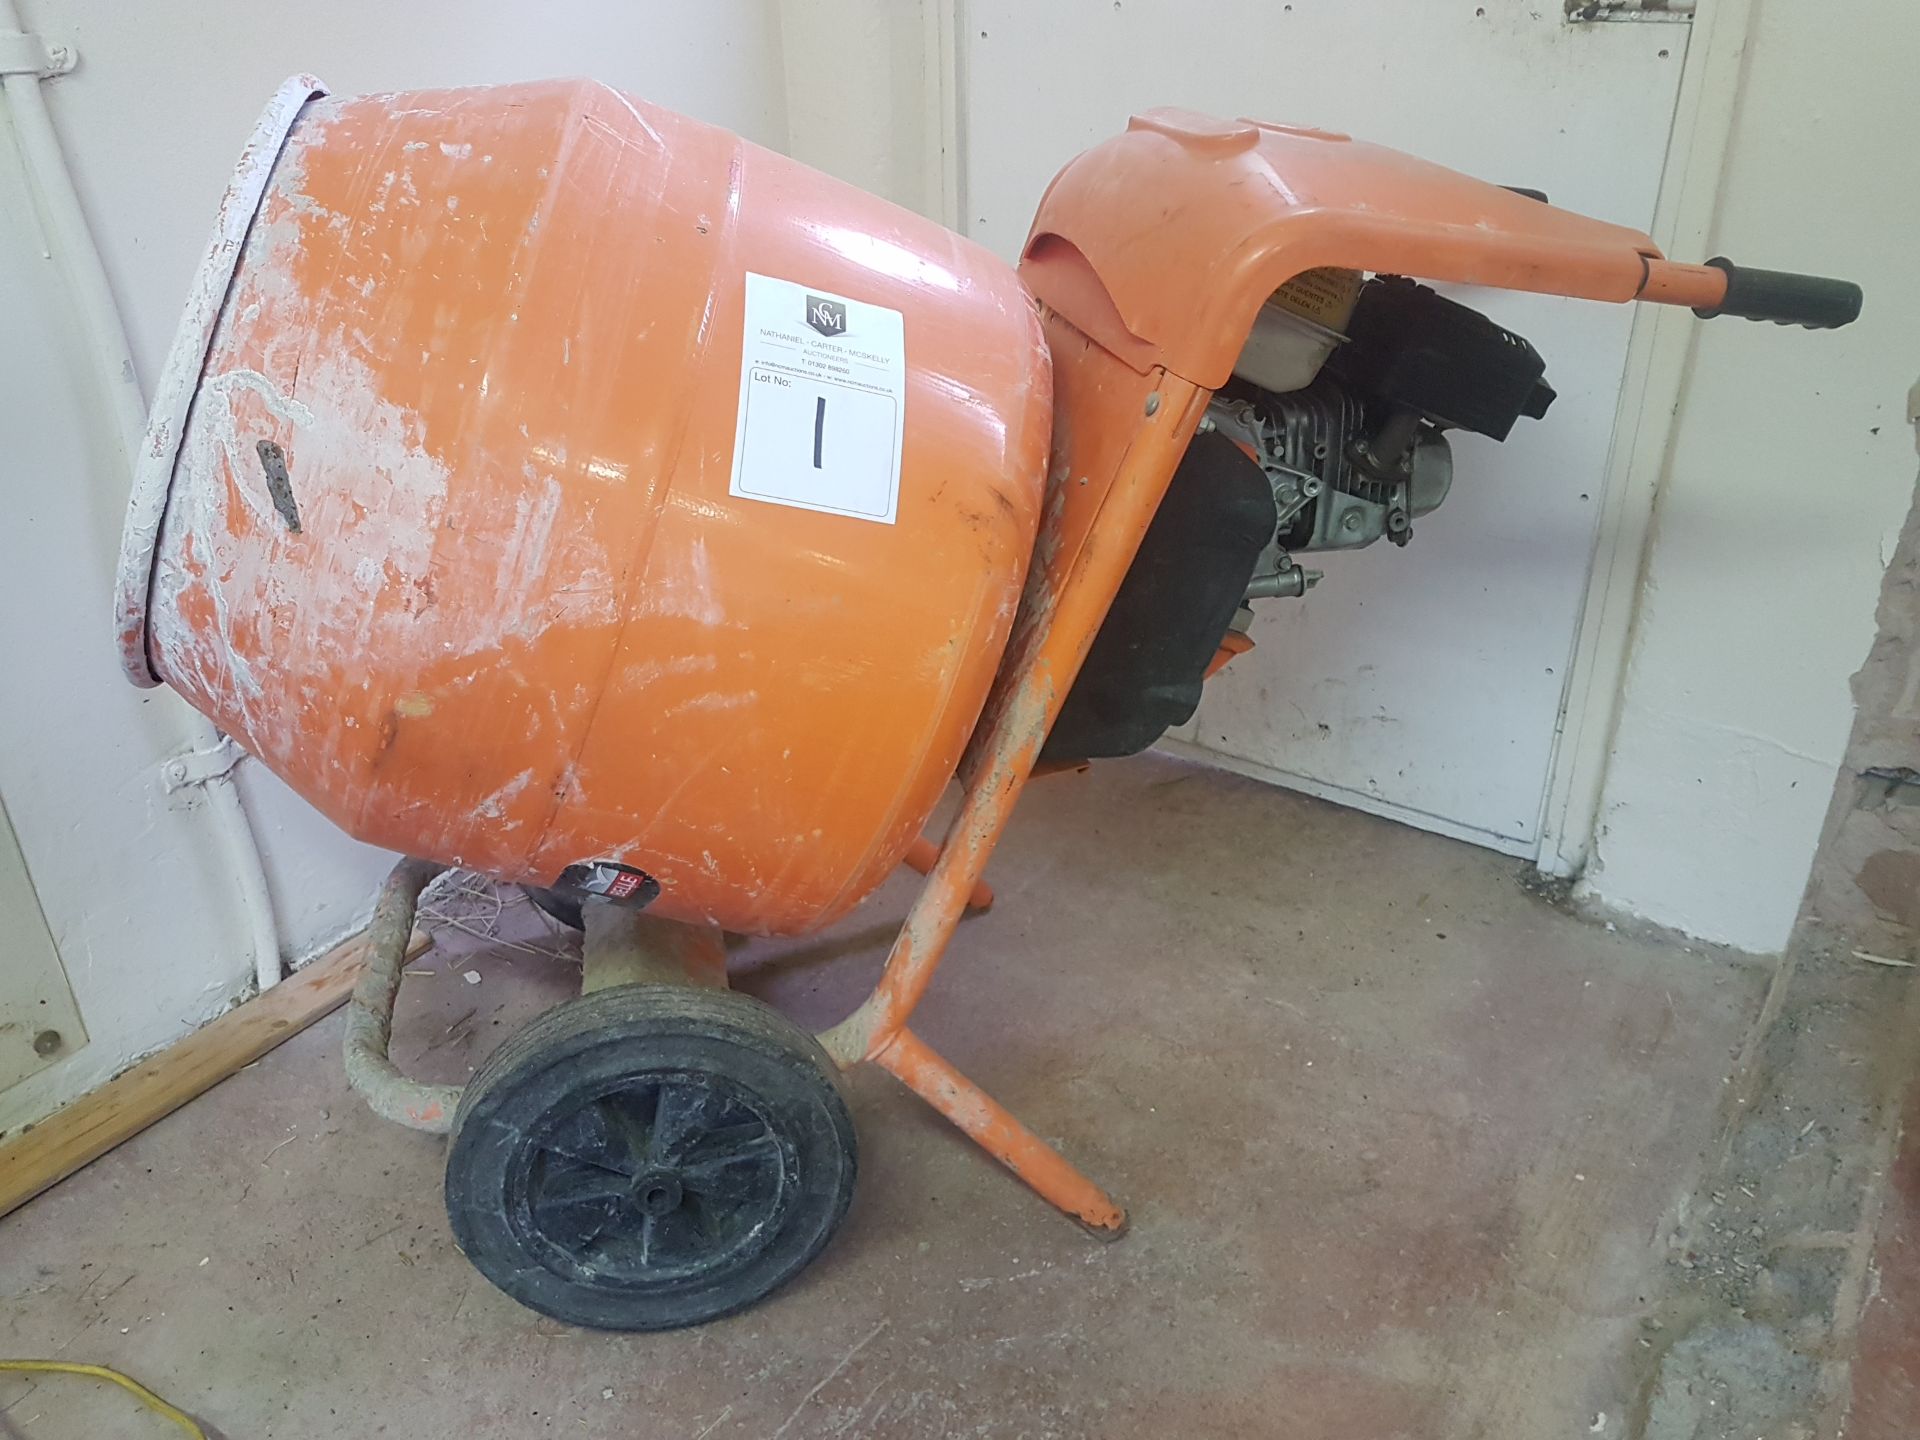 Belle Mini Mix with Honda Powered Engine - Tested/In Working Order